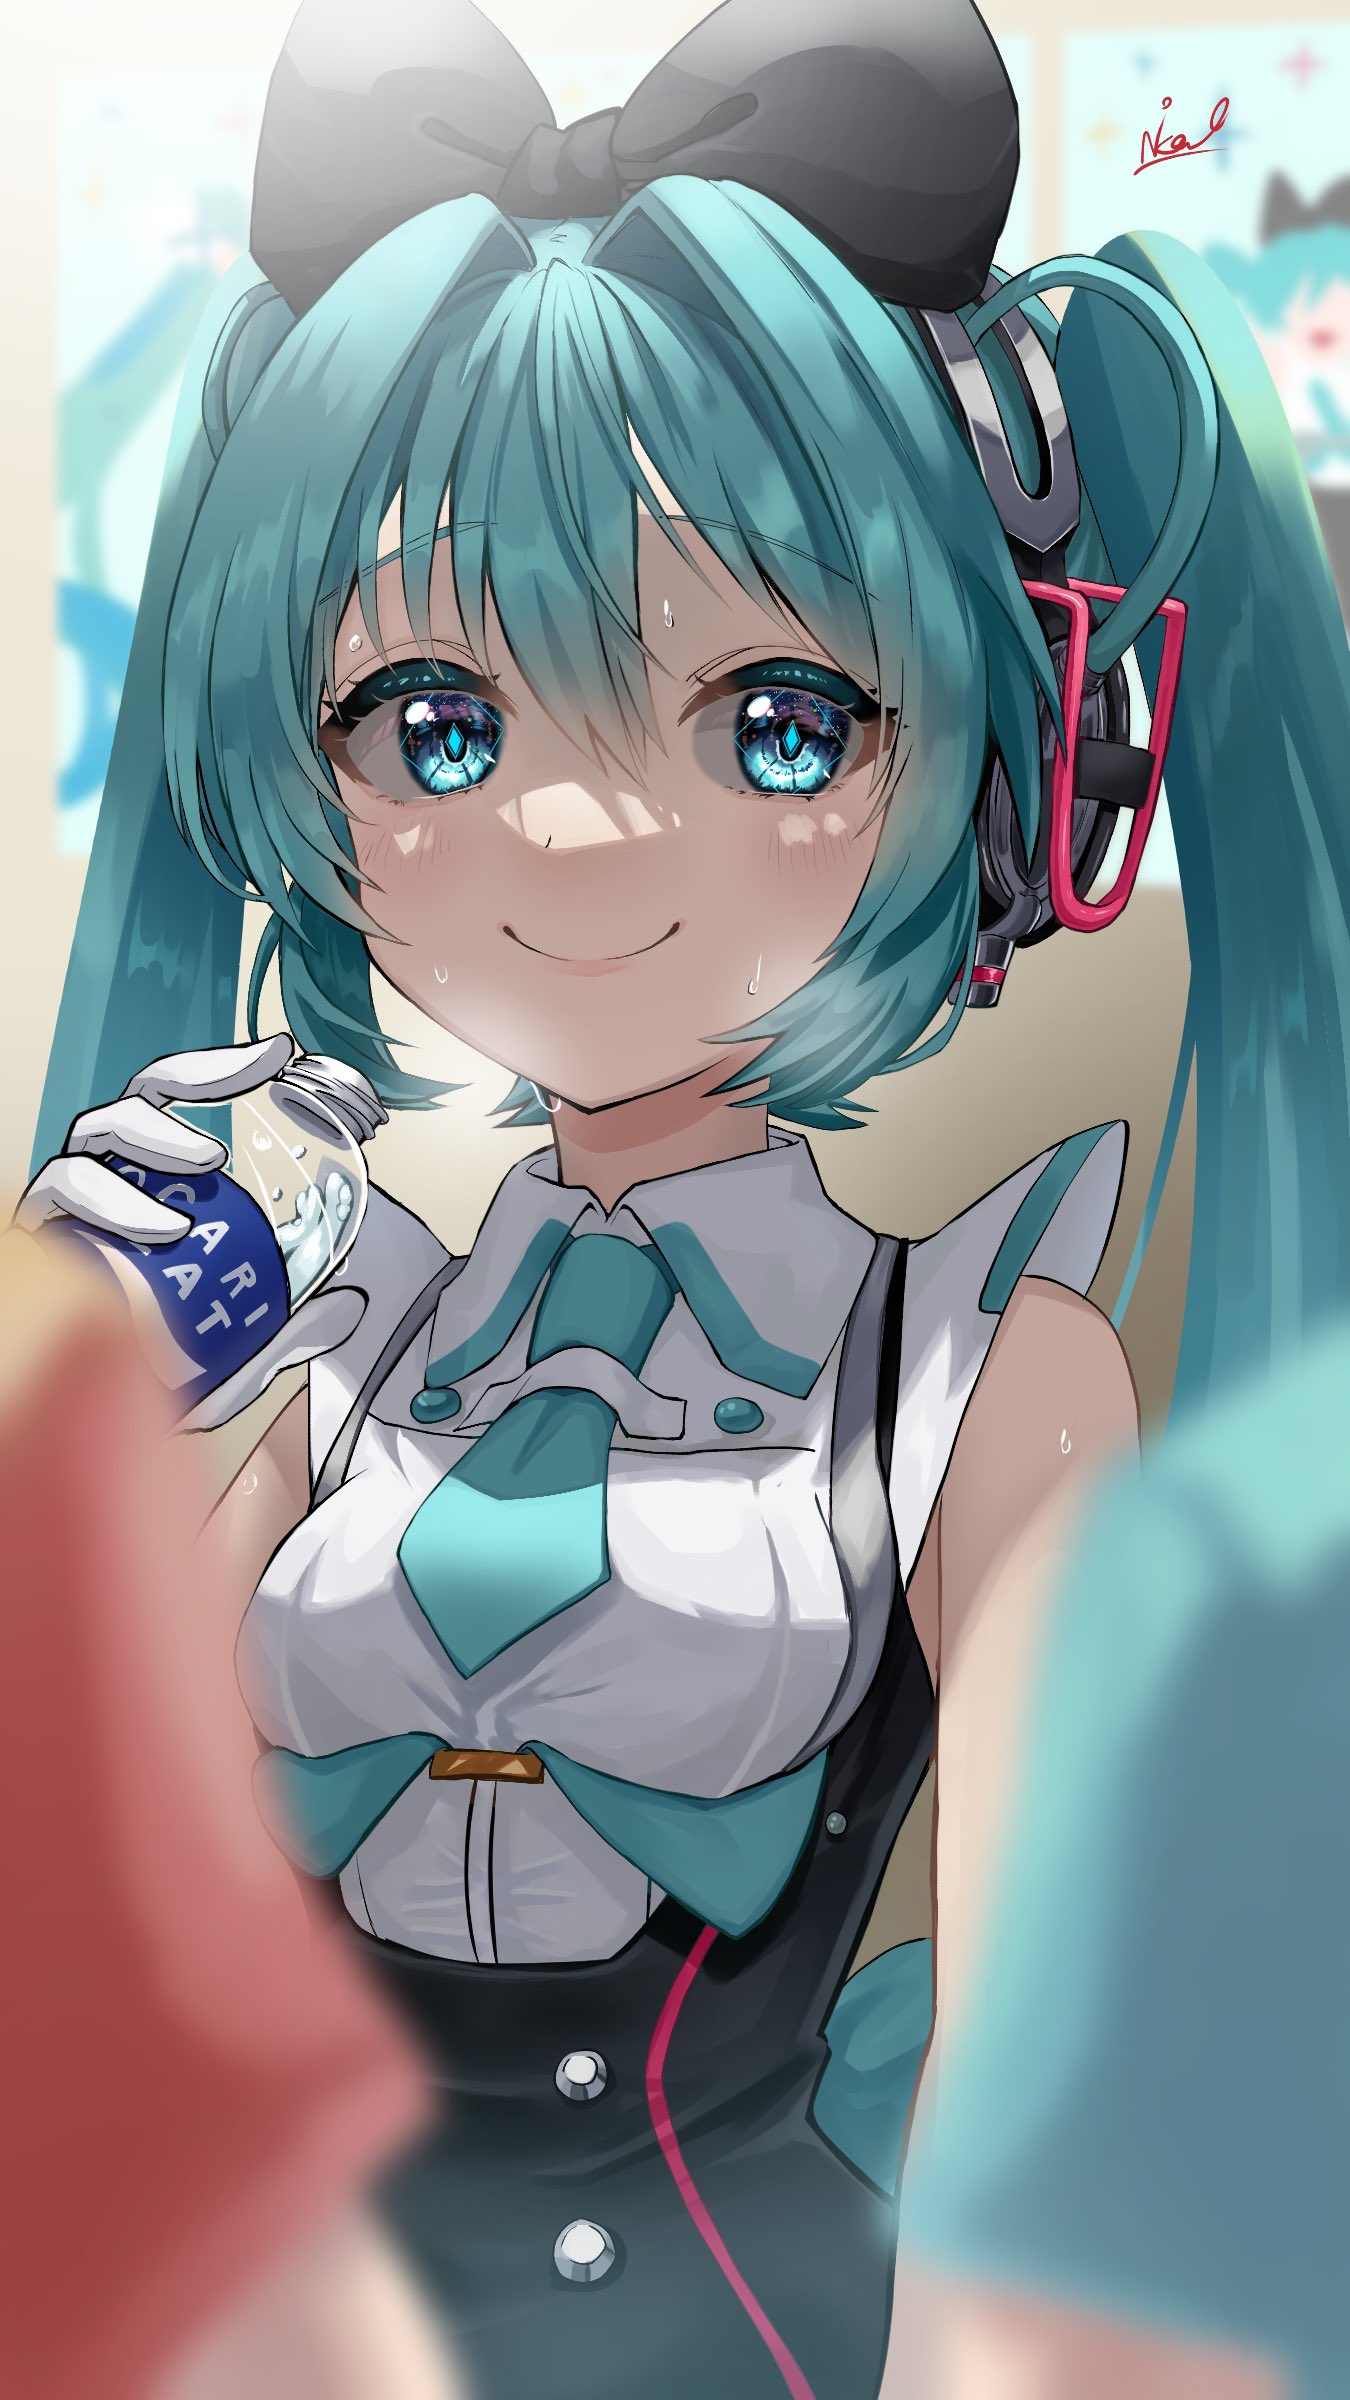 1girl absurdres aqua_eyes aqua_hair aqua_necktie bangs black_bow bottle bow closed_mouth hair_bow hatsune_miku headphones highres holding holding_bottle long_hair looking_at_viewer necktie pocari_sweat smile solo tatyaoekaki twintails upper_body vocaloid water_bottle